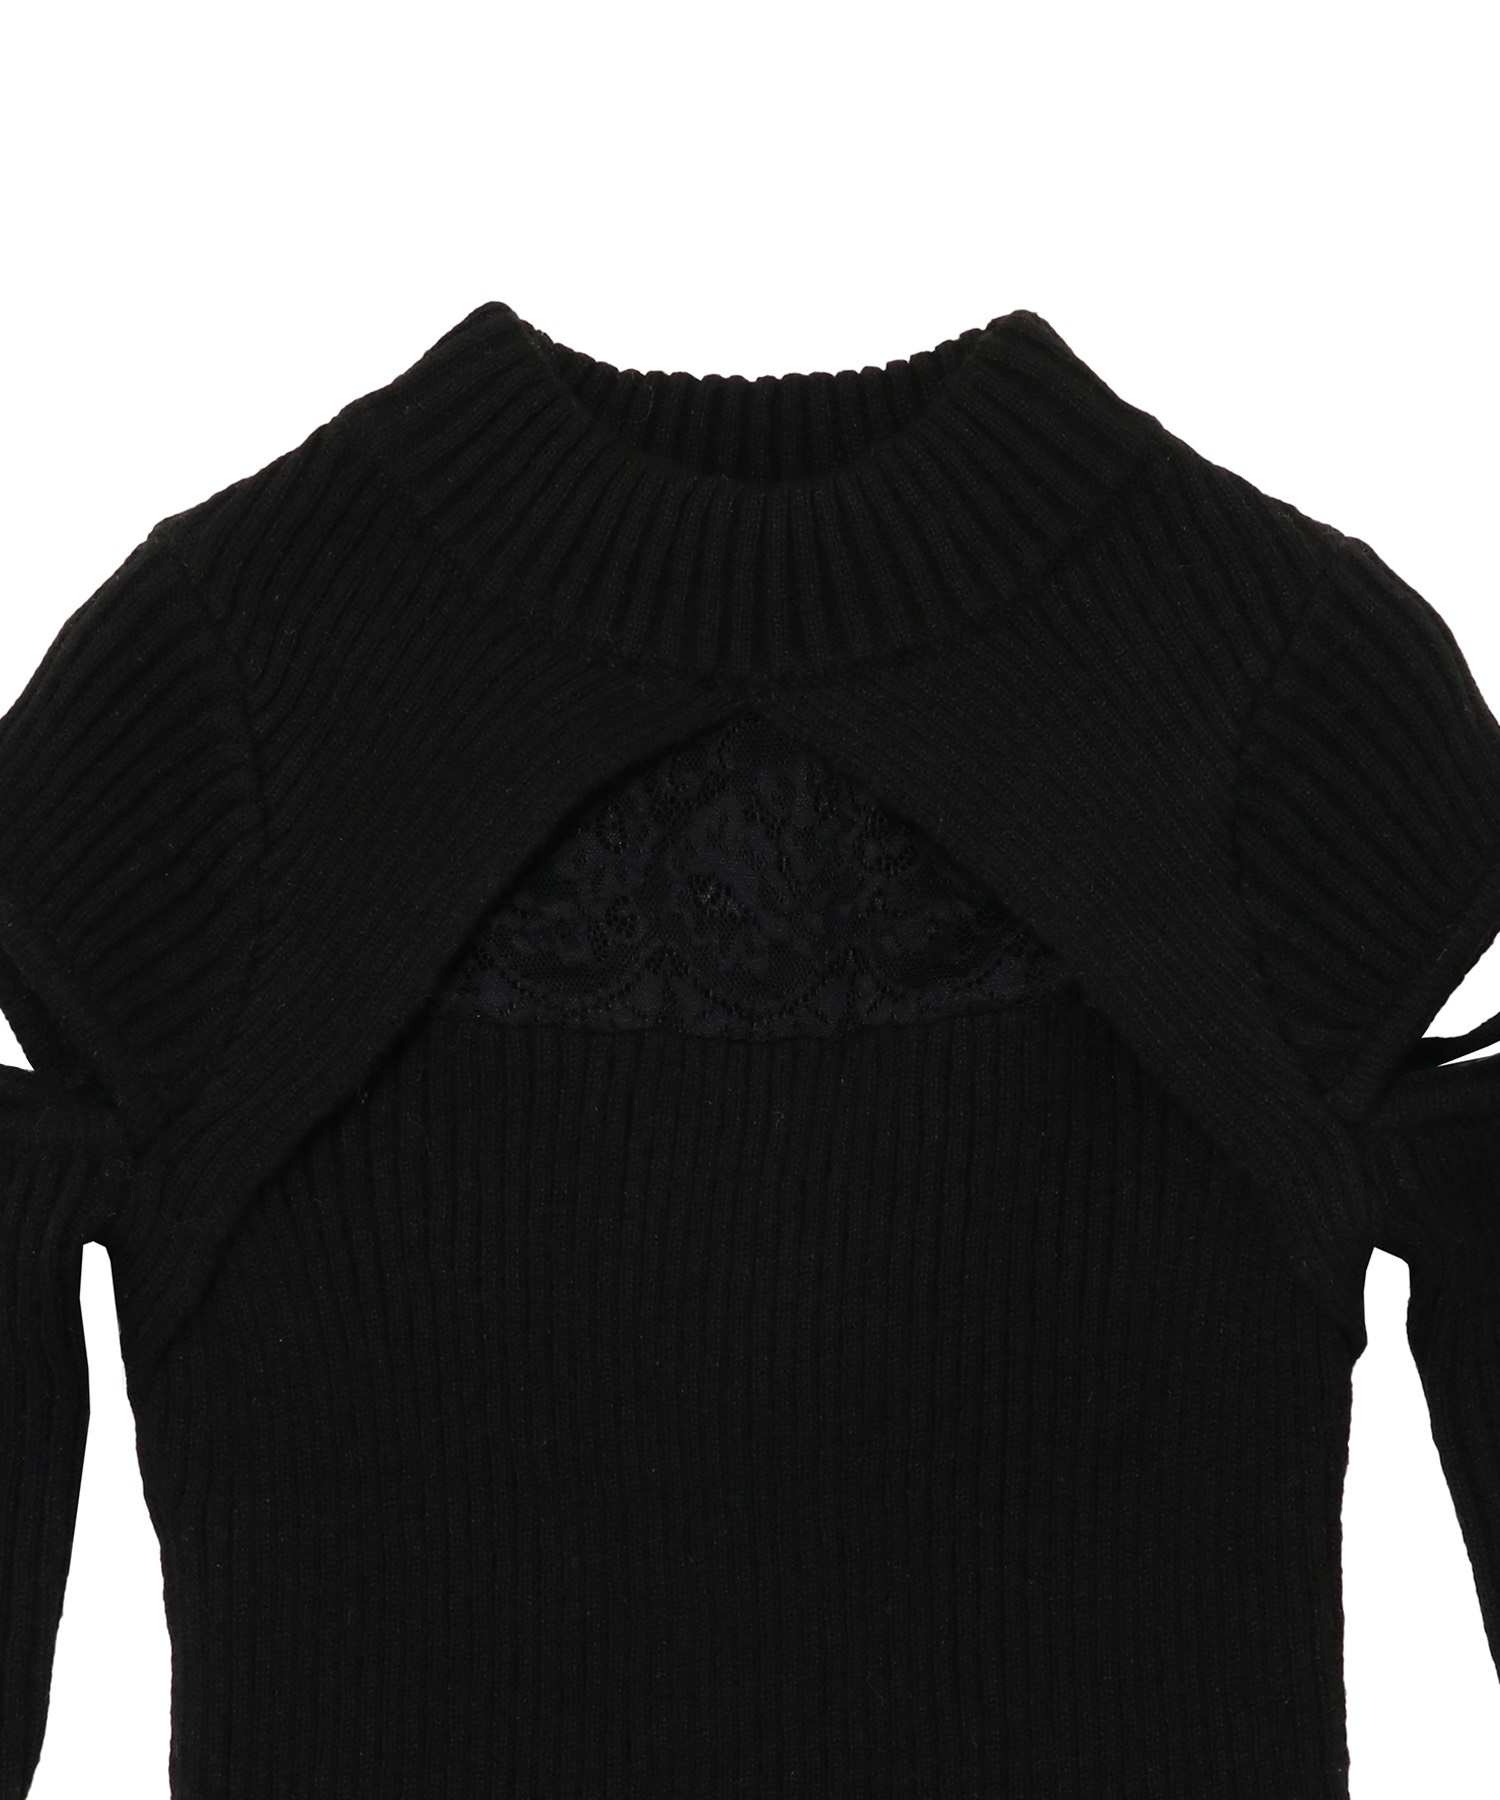 cut out lace point knit tops【black】 – BUNNY APARTMENT